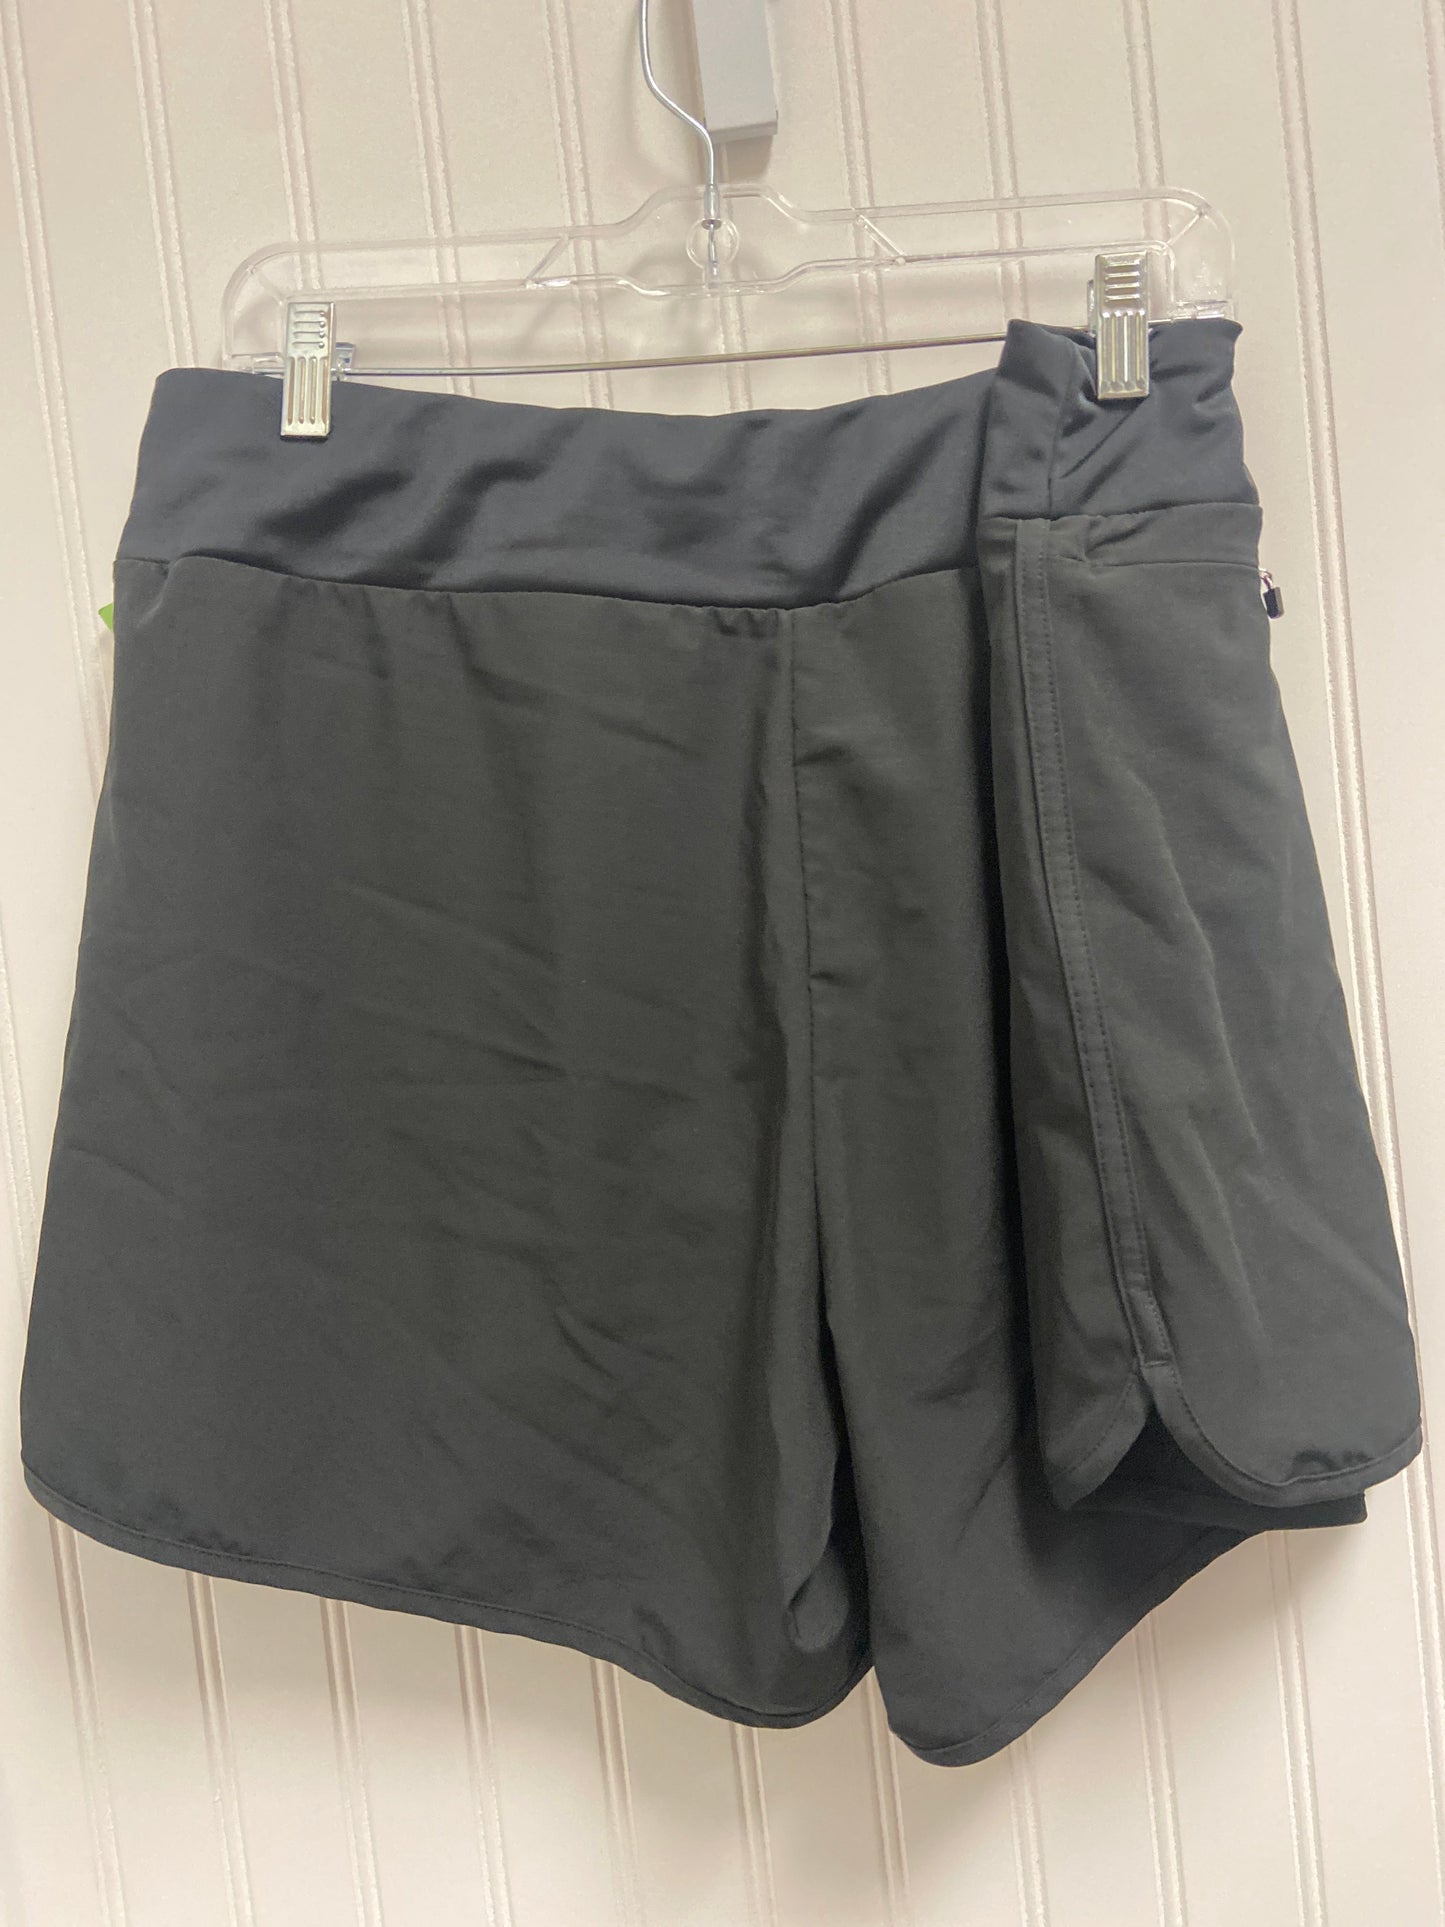 Athletic Shorts By Hang Ten  Size: 1x